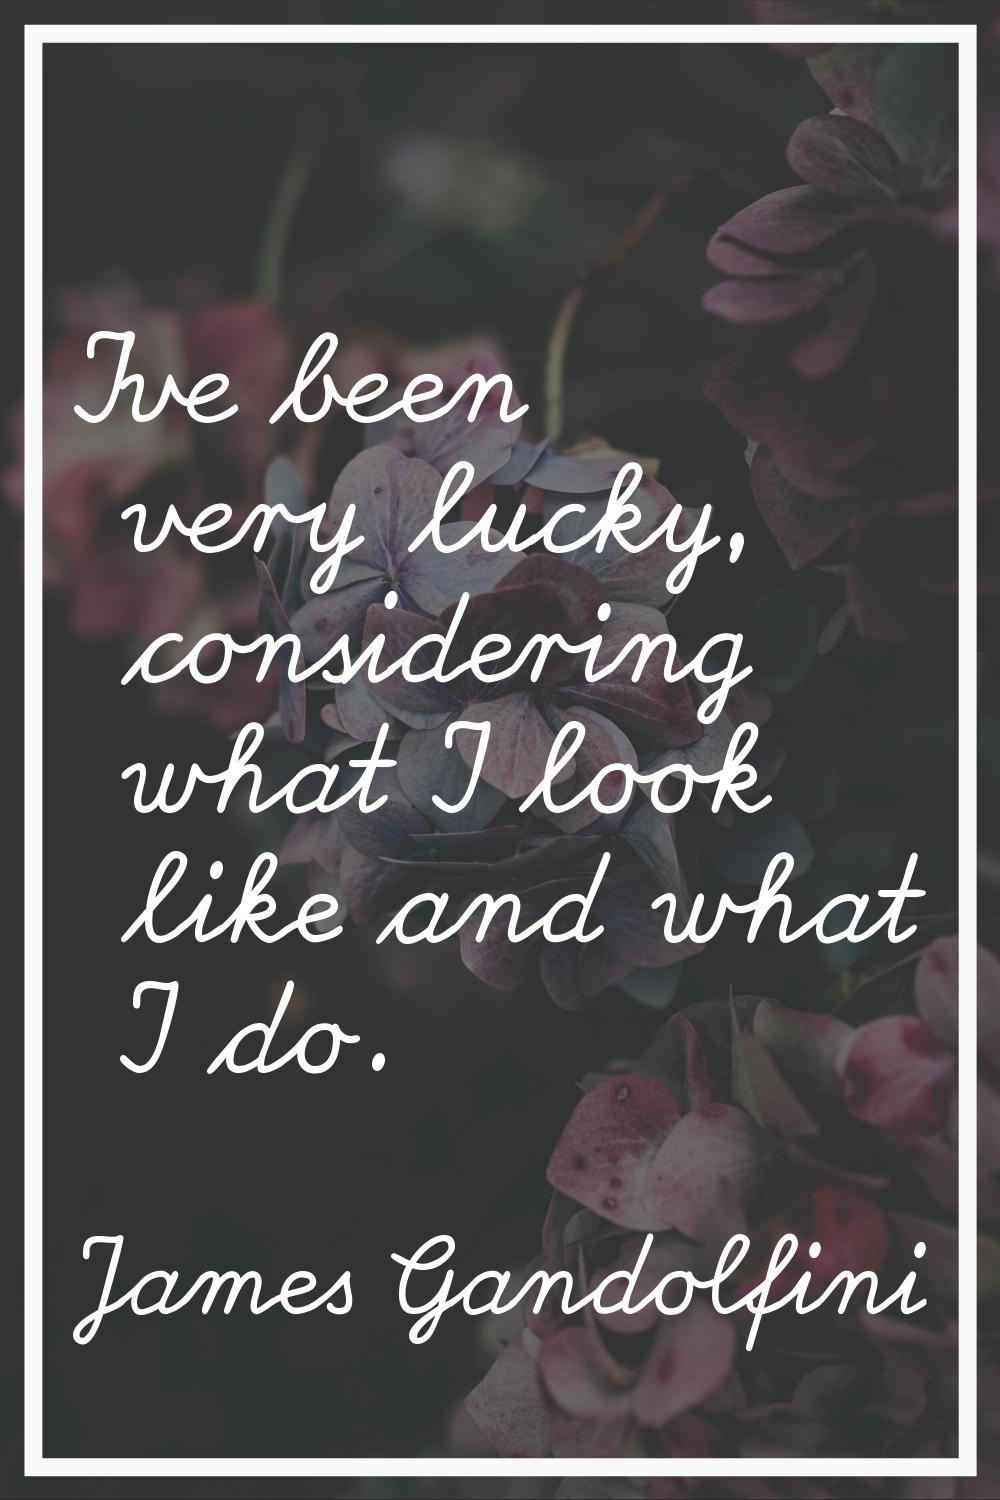 I've been very lucky, considering what I look like and what I do.